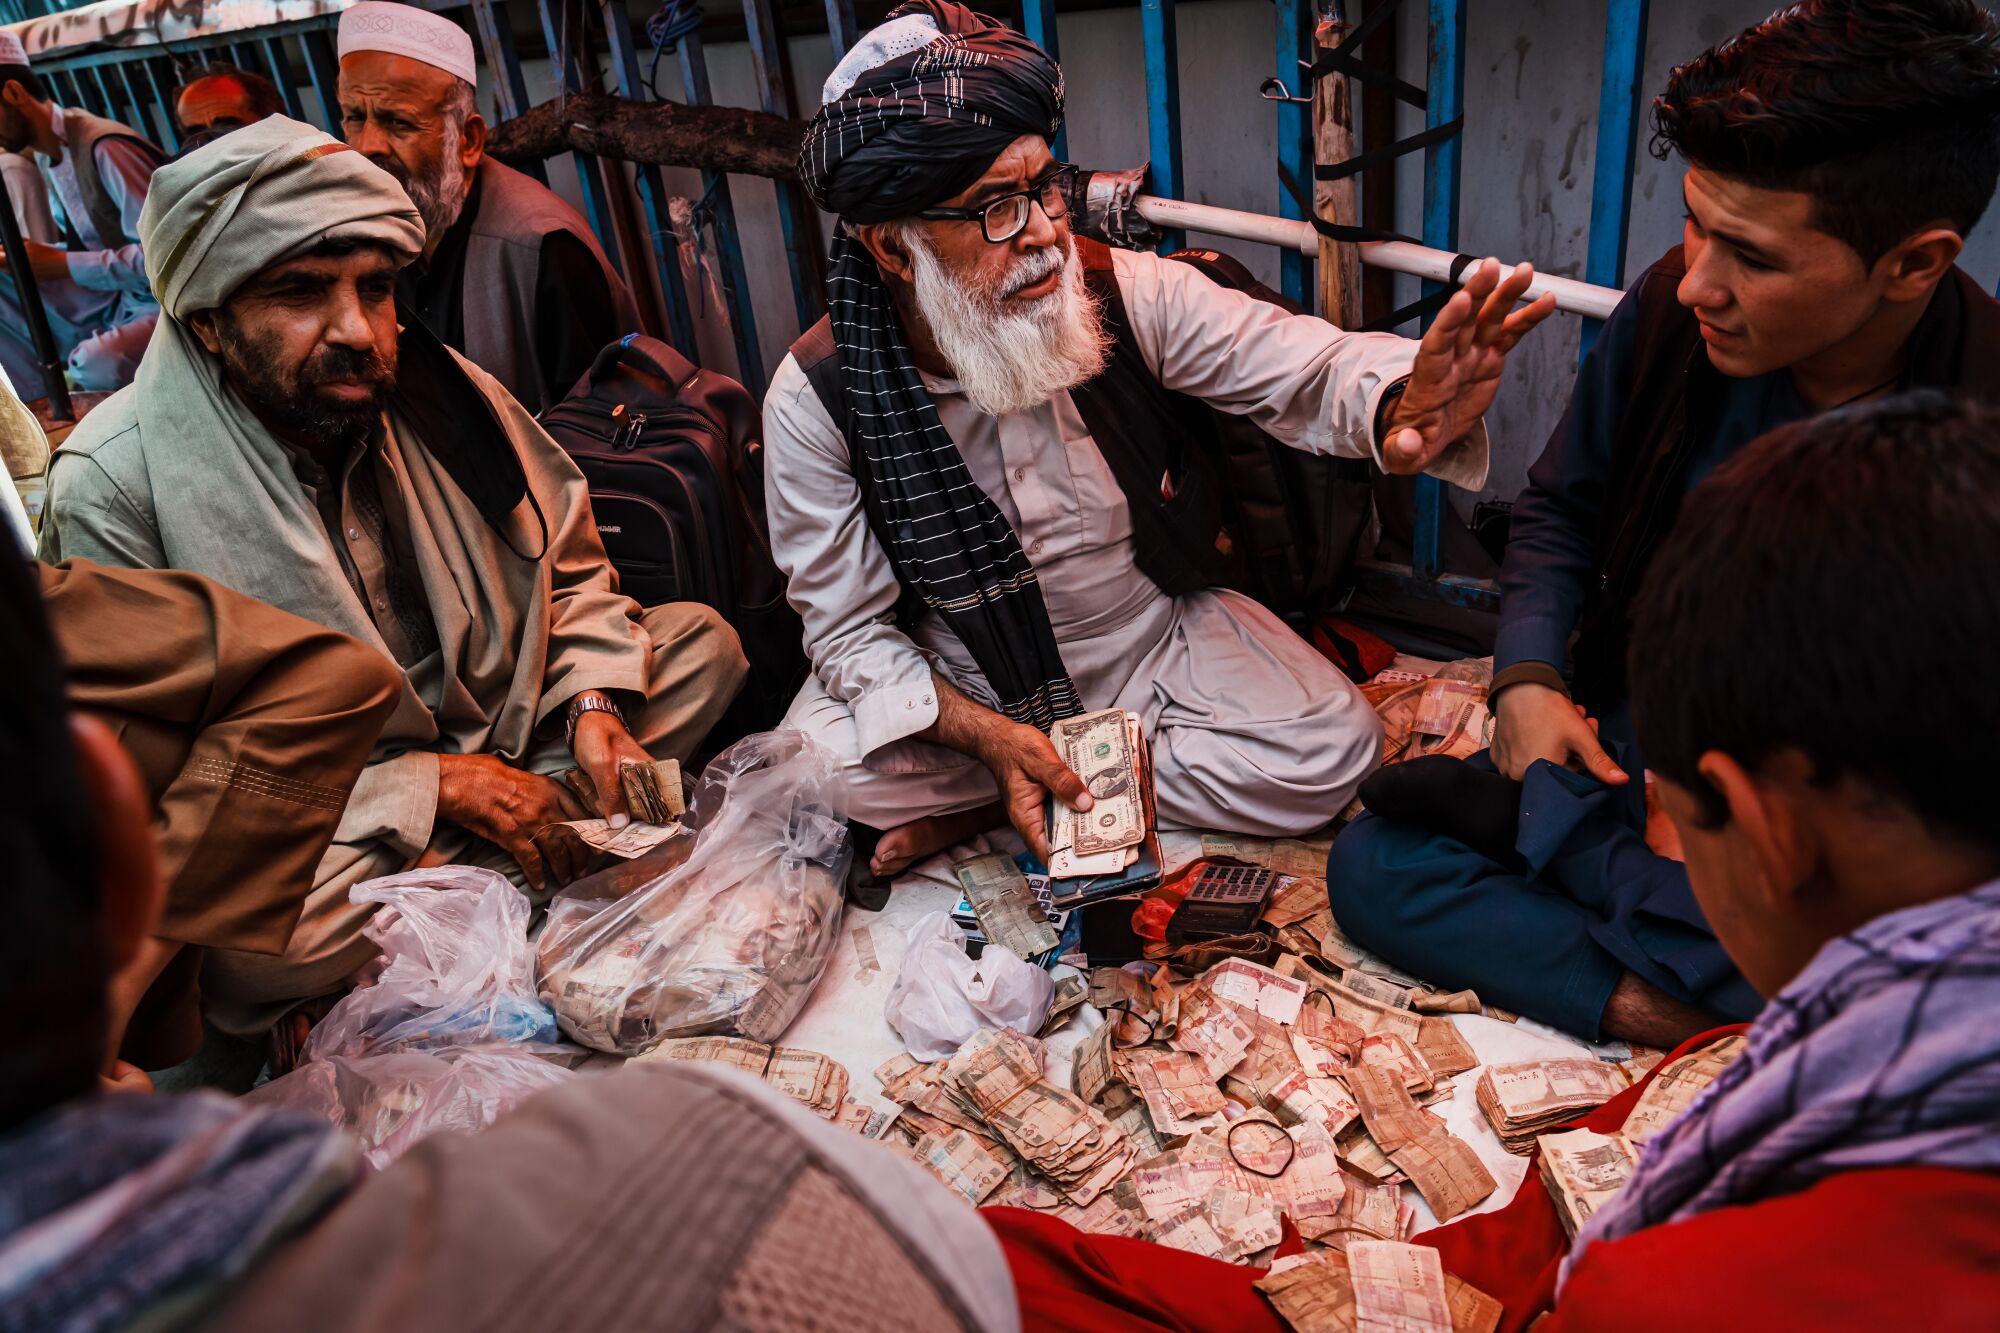 Forex traders sort through stacks of Afghan currency